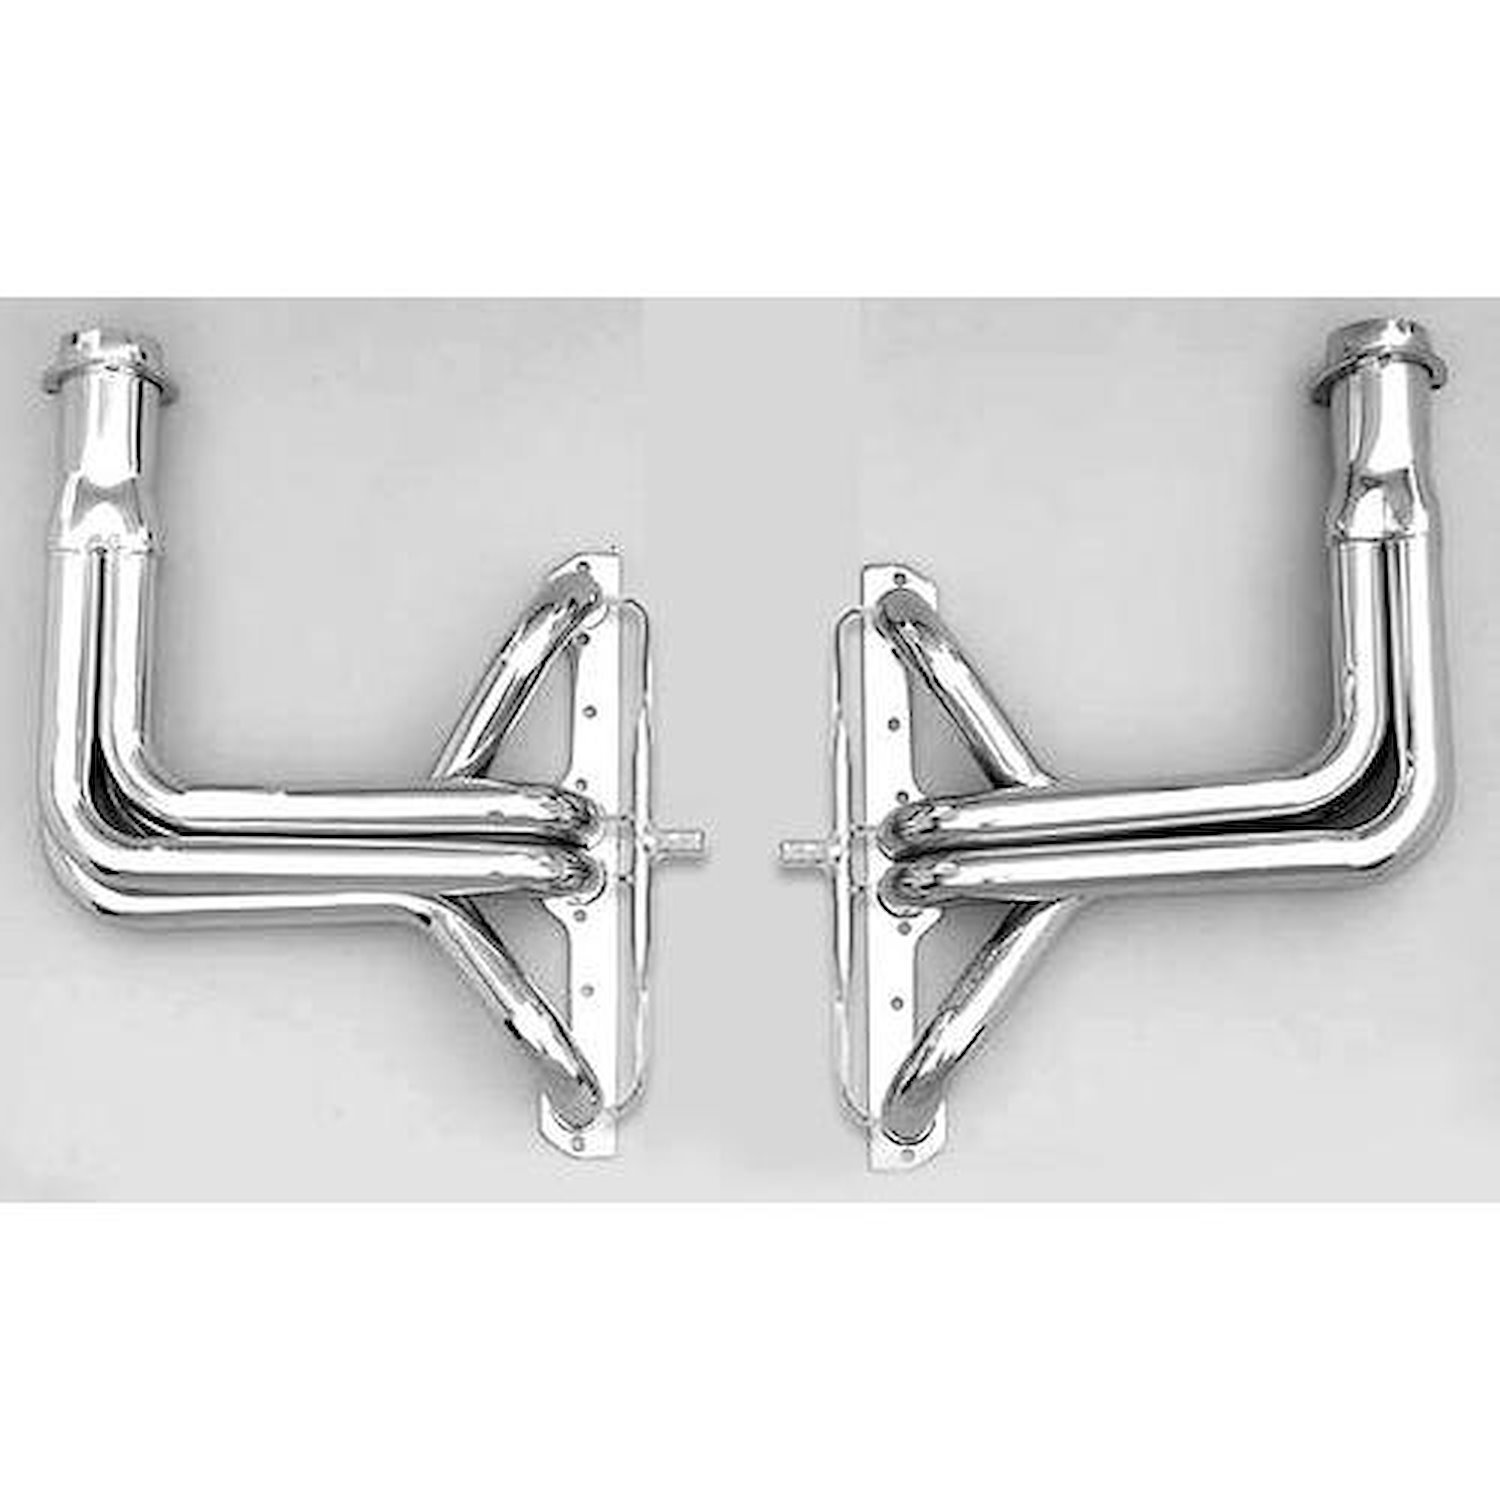 Standard Duty HTC Coated Full-Length Headers 1963-82 Chevy